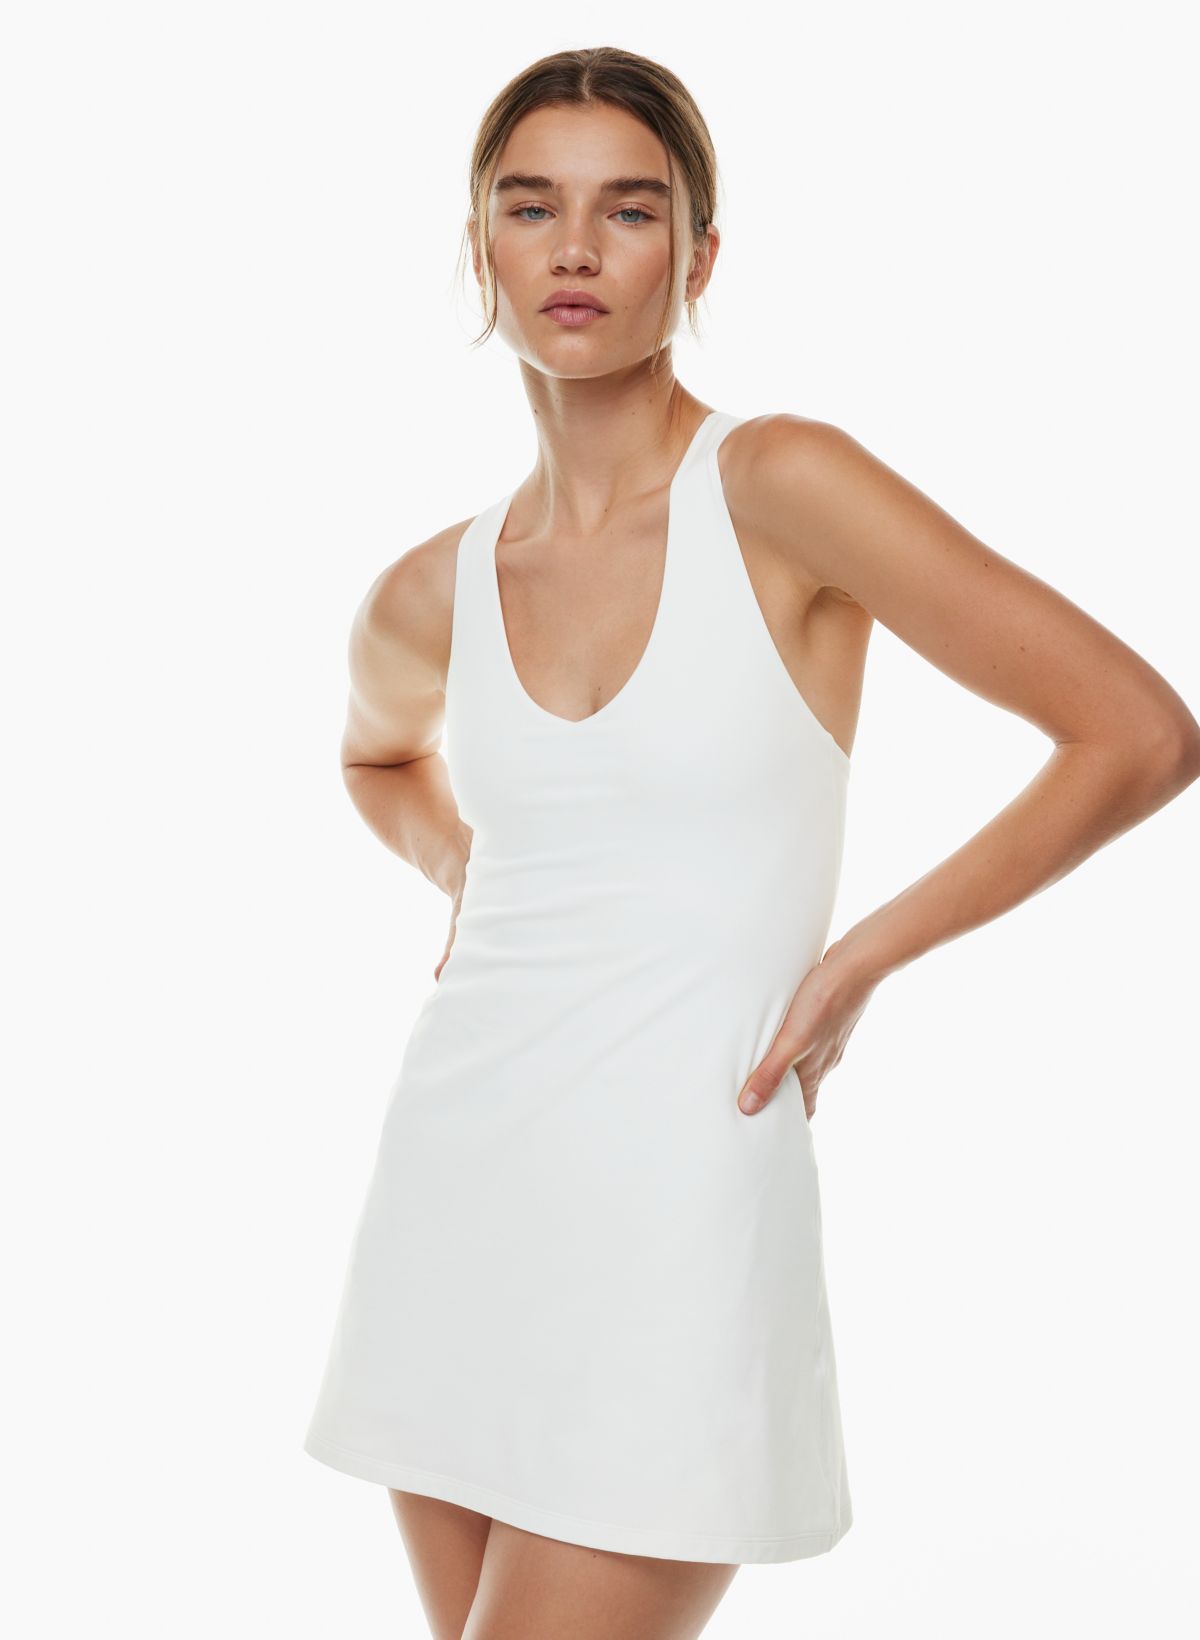 Athleta sizzle dress with built in bra halter top  Mini dress with  sleeves, Sporty dress, Cotton tunic dress